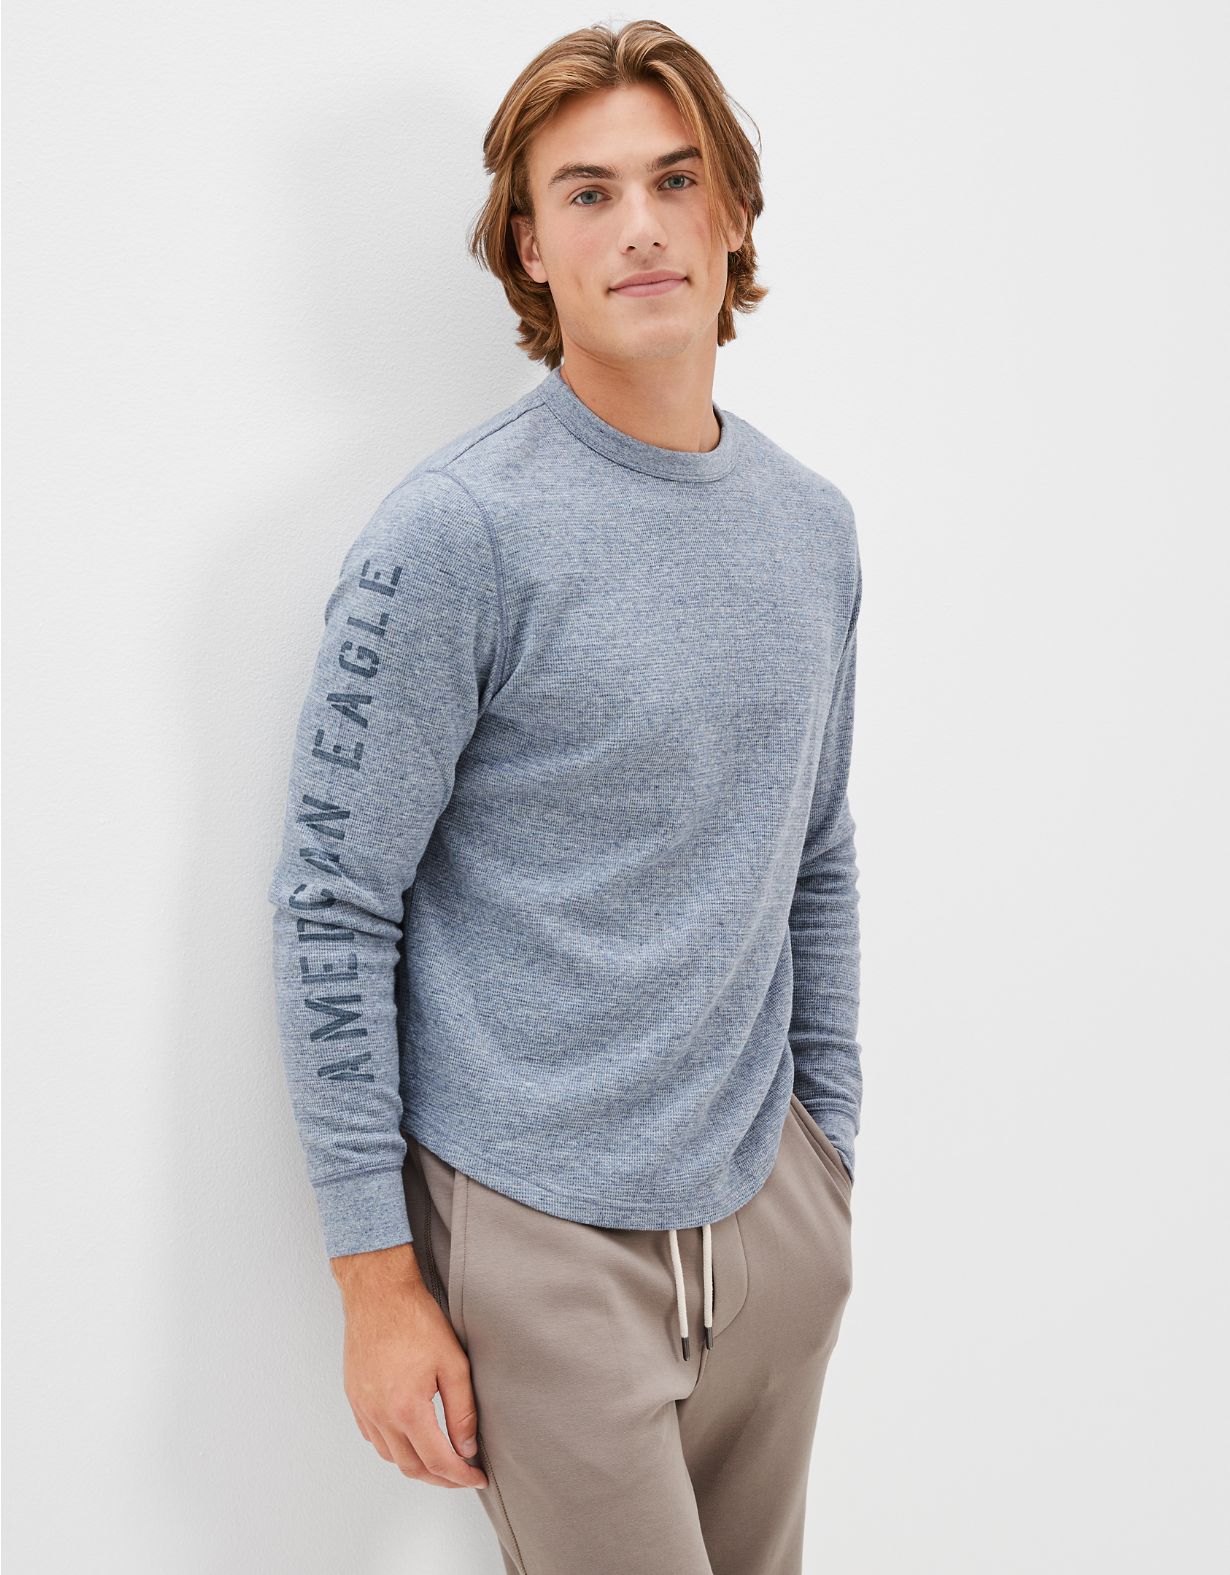 AE Super Soft Long-Sleeve Graphic Thermal Shirt